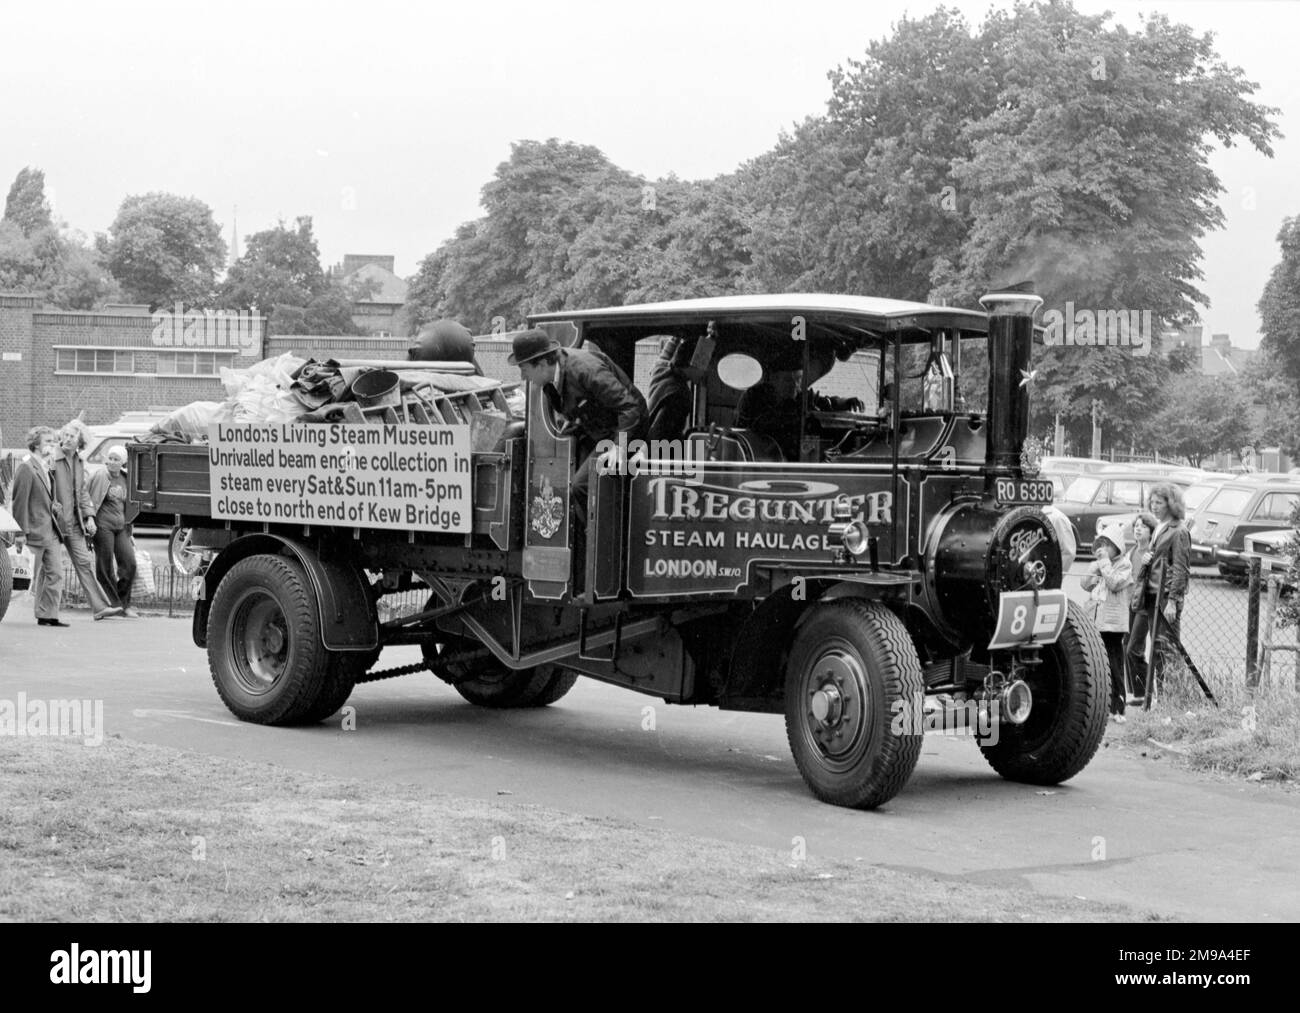 Foden Wagon, regn. RO6330, number 13488, at a steam rally in Lambeth. Built in 1929 by Edwin Foden, Sons and Co of Elworth Works, Sandbach, powered by a compound steam engine. Stock Photo